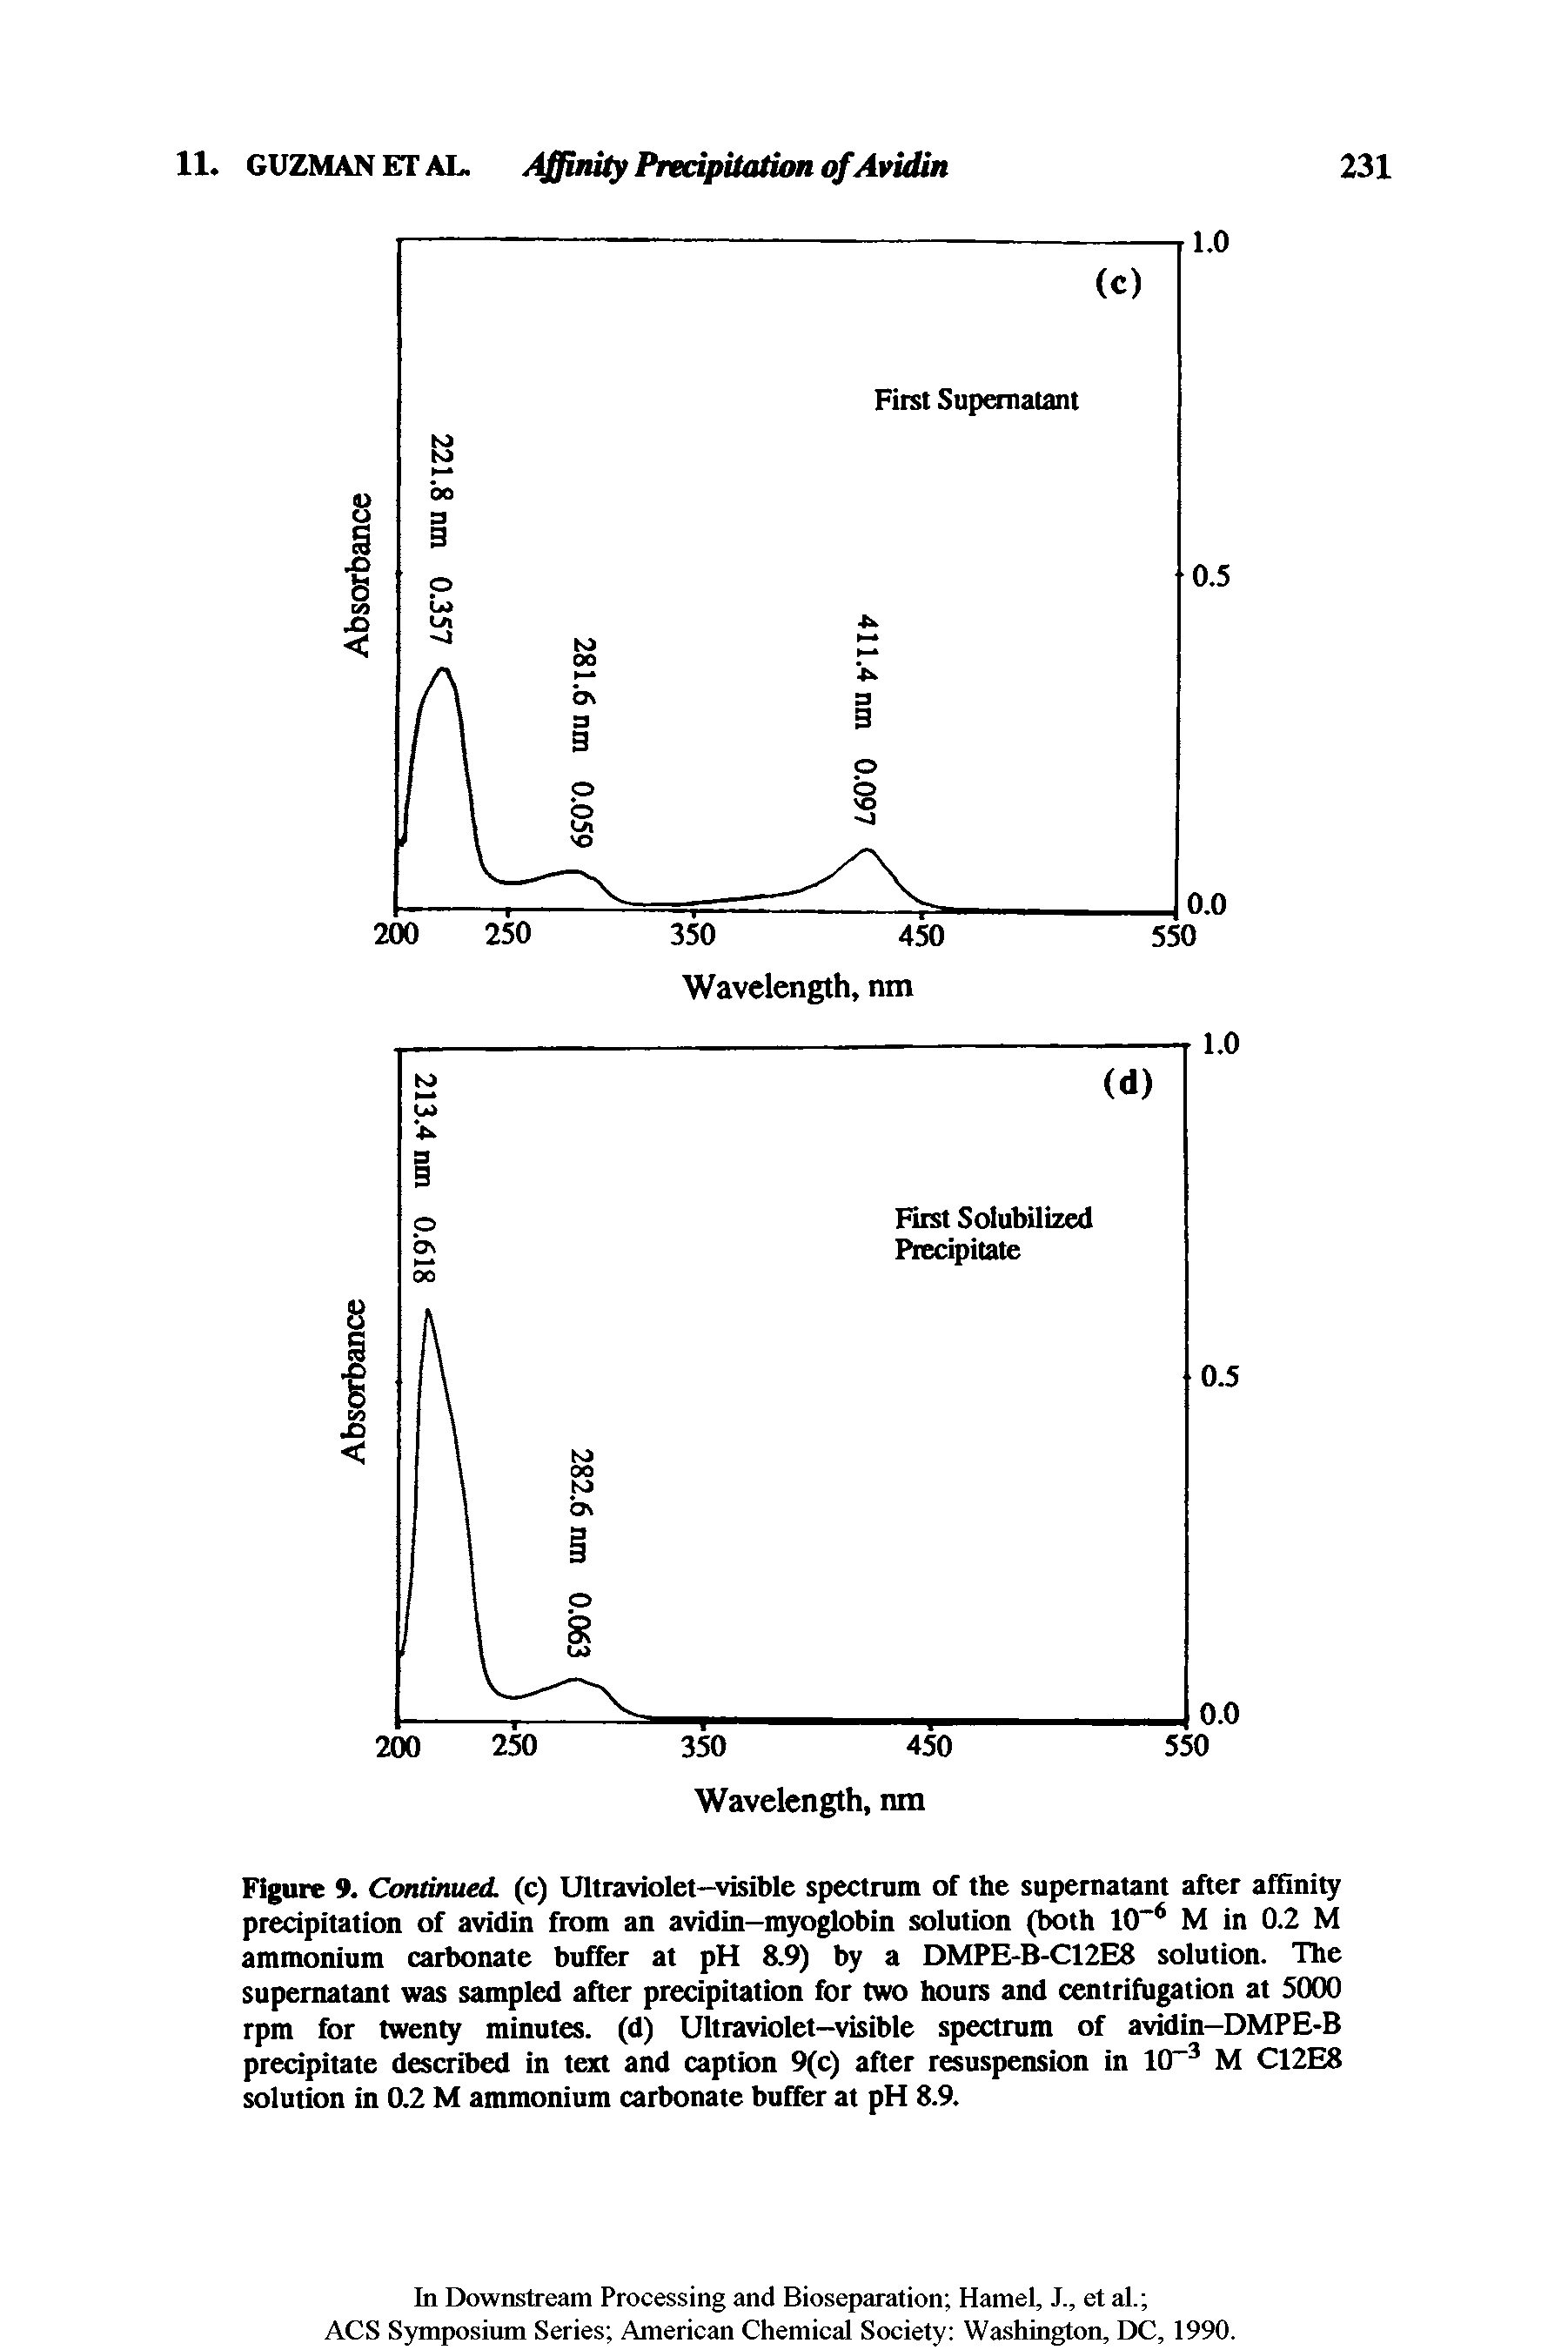 Figure 9. Continued, (c) Ultraviolet—visible spectrum of the supernatant after affinity precipitation of avidin from an avidin—myoglobin solution (both 10" M in 0.2 M ammonium carbonate buffer at pH 8.9) by a DMPE-B-C12E8 solution. The supernatant was sampled after precipitation for two hours and centrifugation at 5000 rpm for twenty minutes, (d) Ultraviolet—visible spectrum of avidin—DMPE-B precipitate described in text and caption 9(c) after resuspension in 10" M C12E8 solution in 0.2 M ammonium carbonate buffer at pH 8.9.